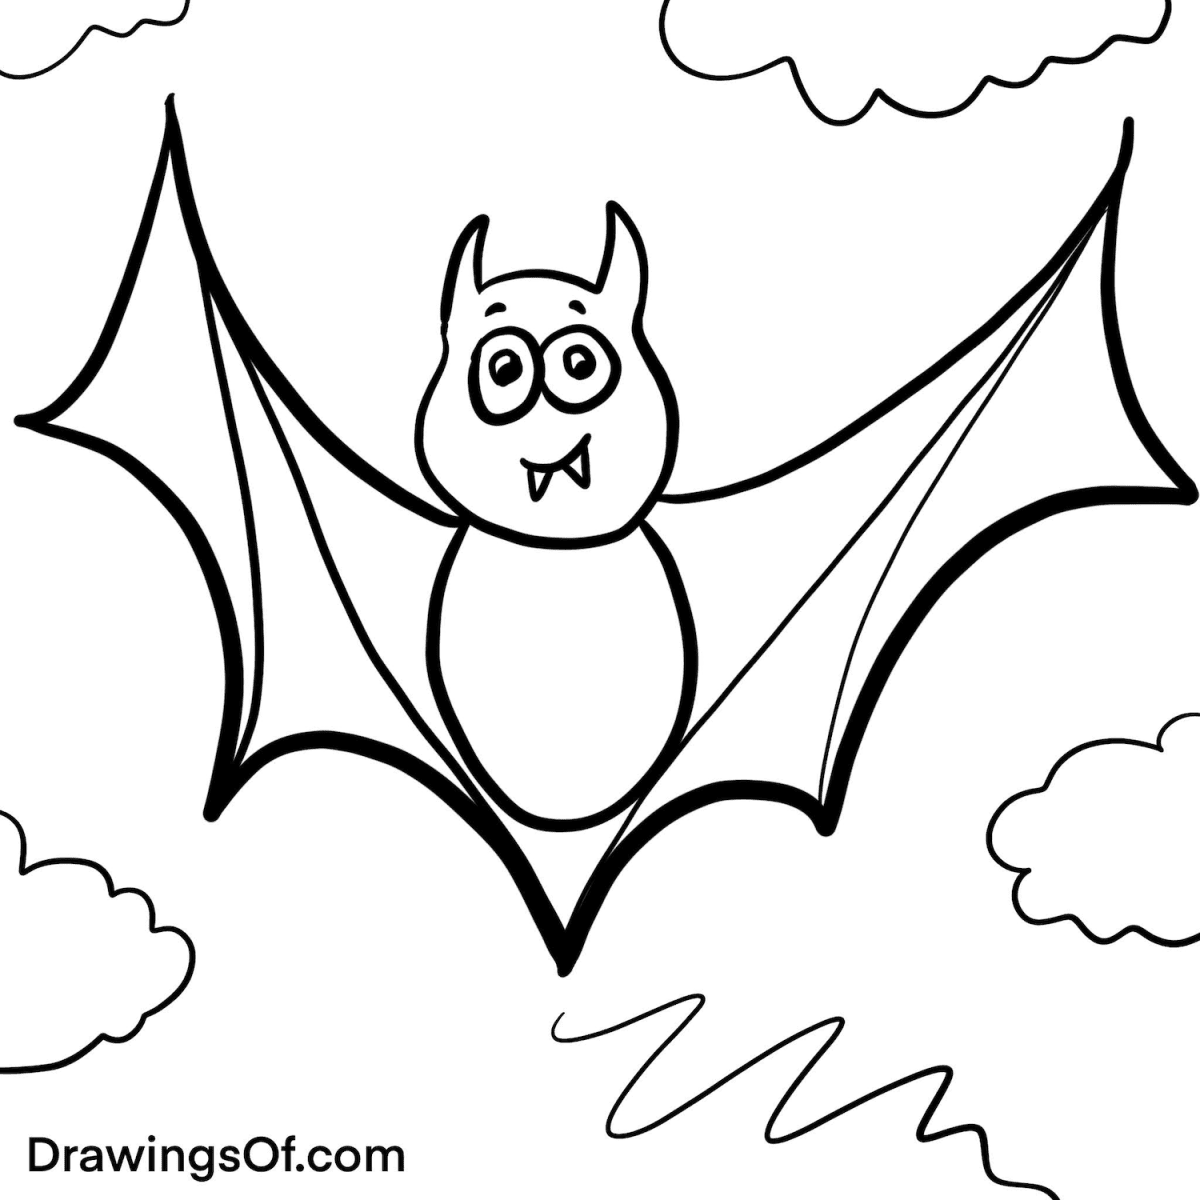 How to draw a bat black and white coloring sheet